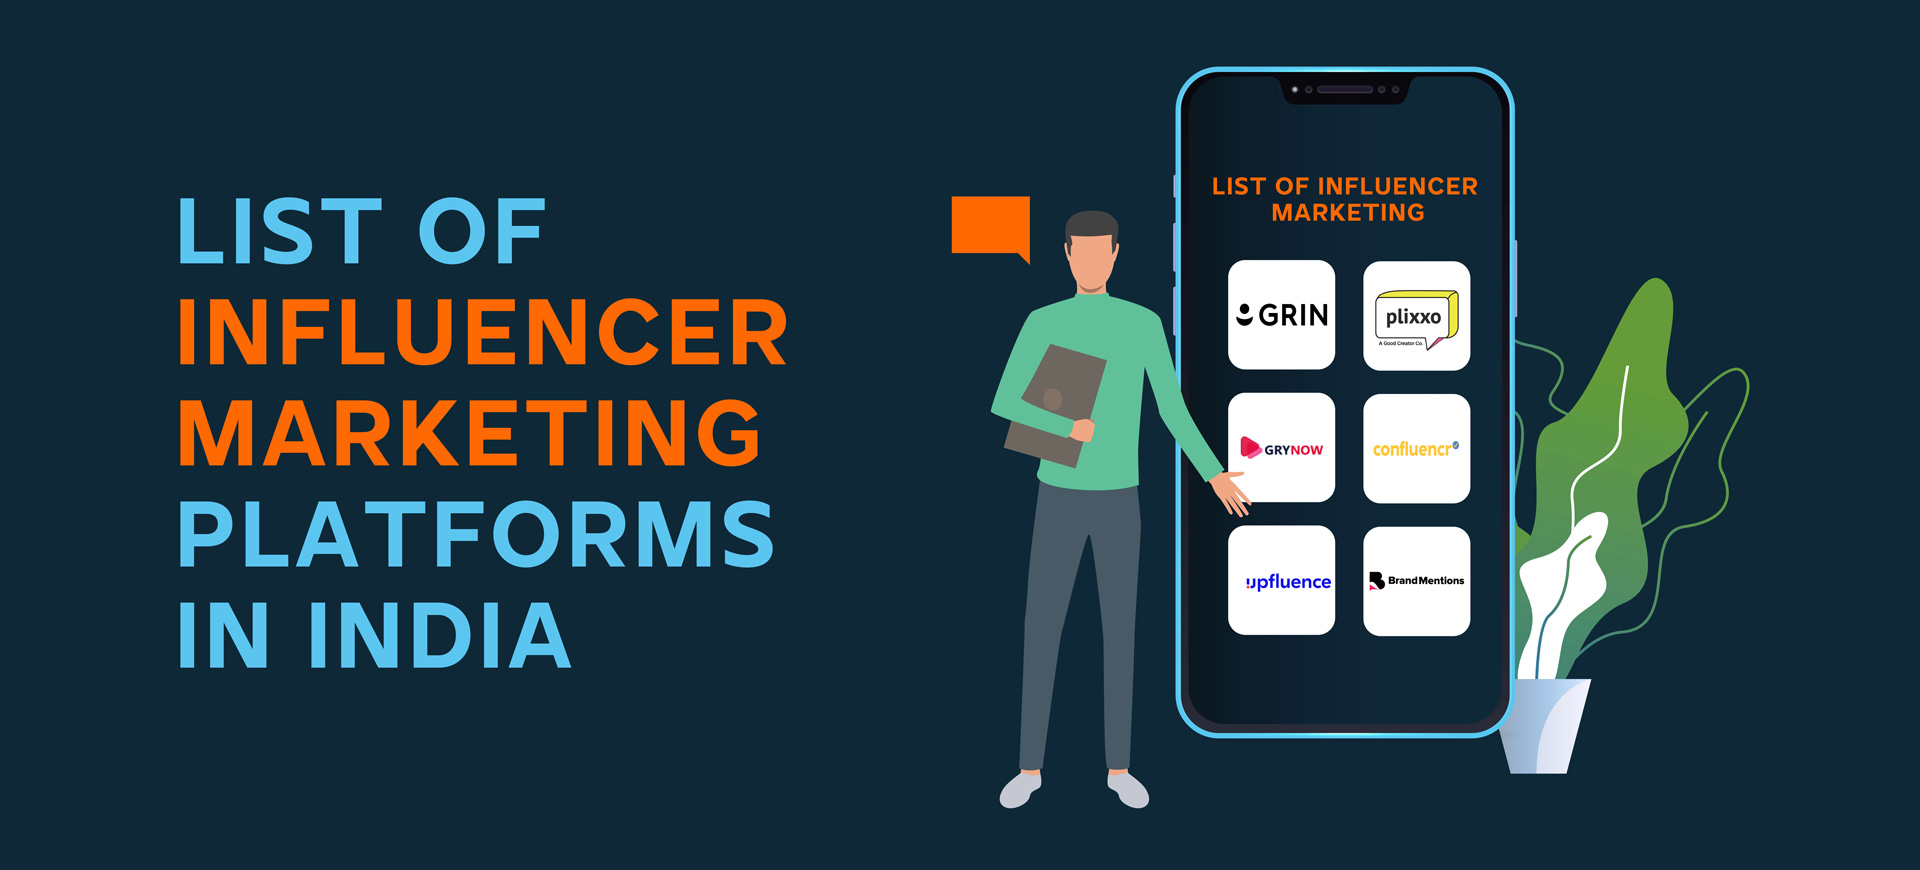 List Of Influencer Marketing Platforms In India